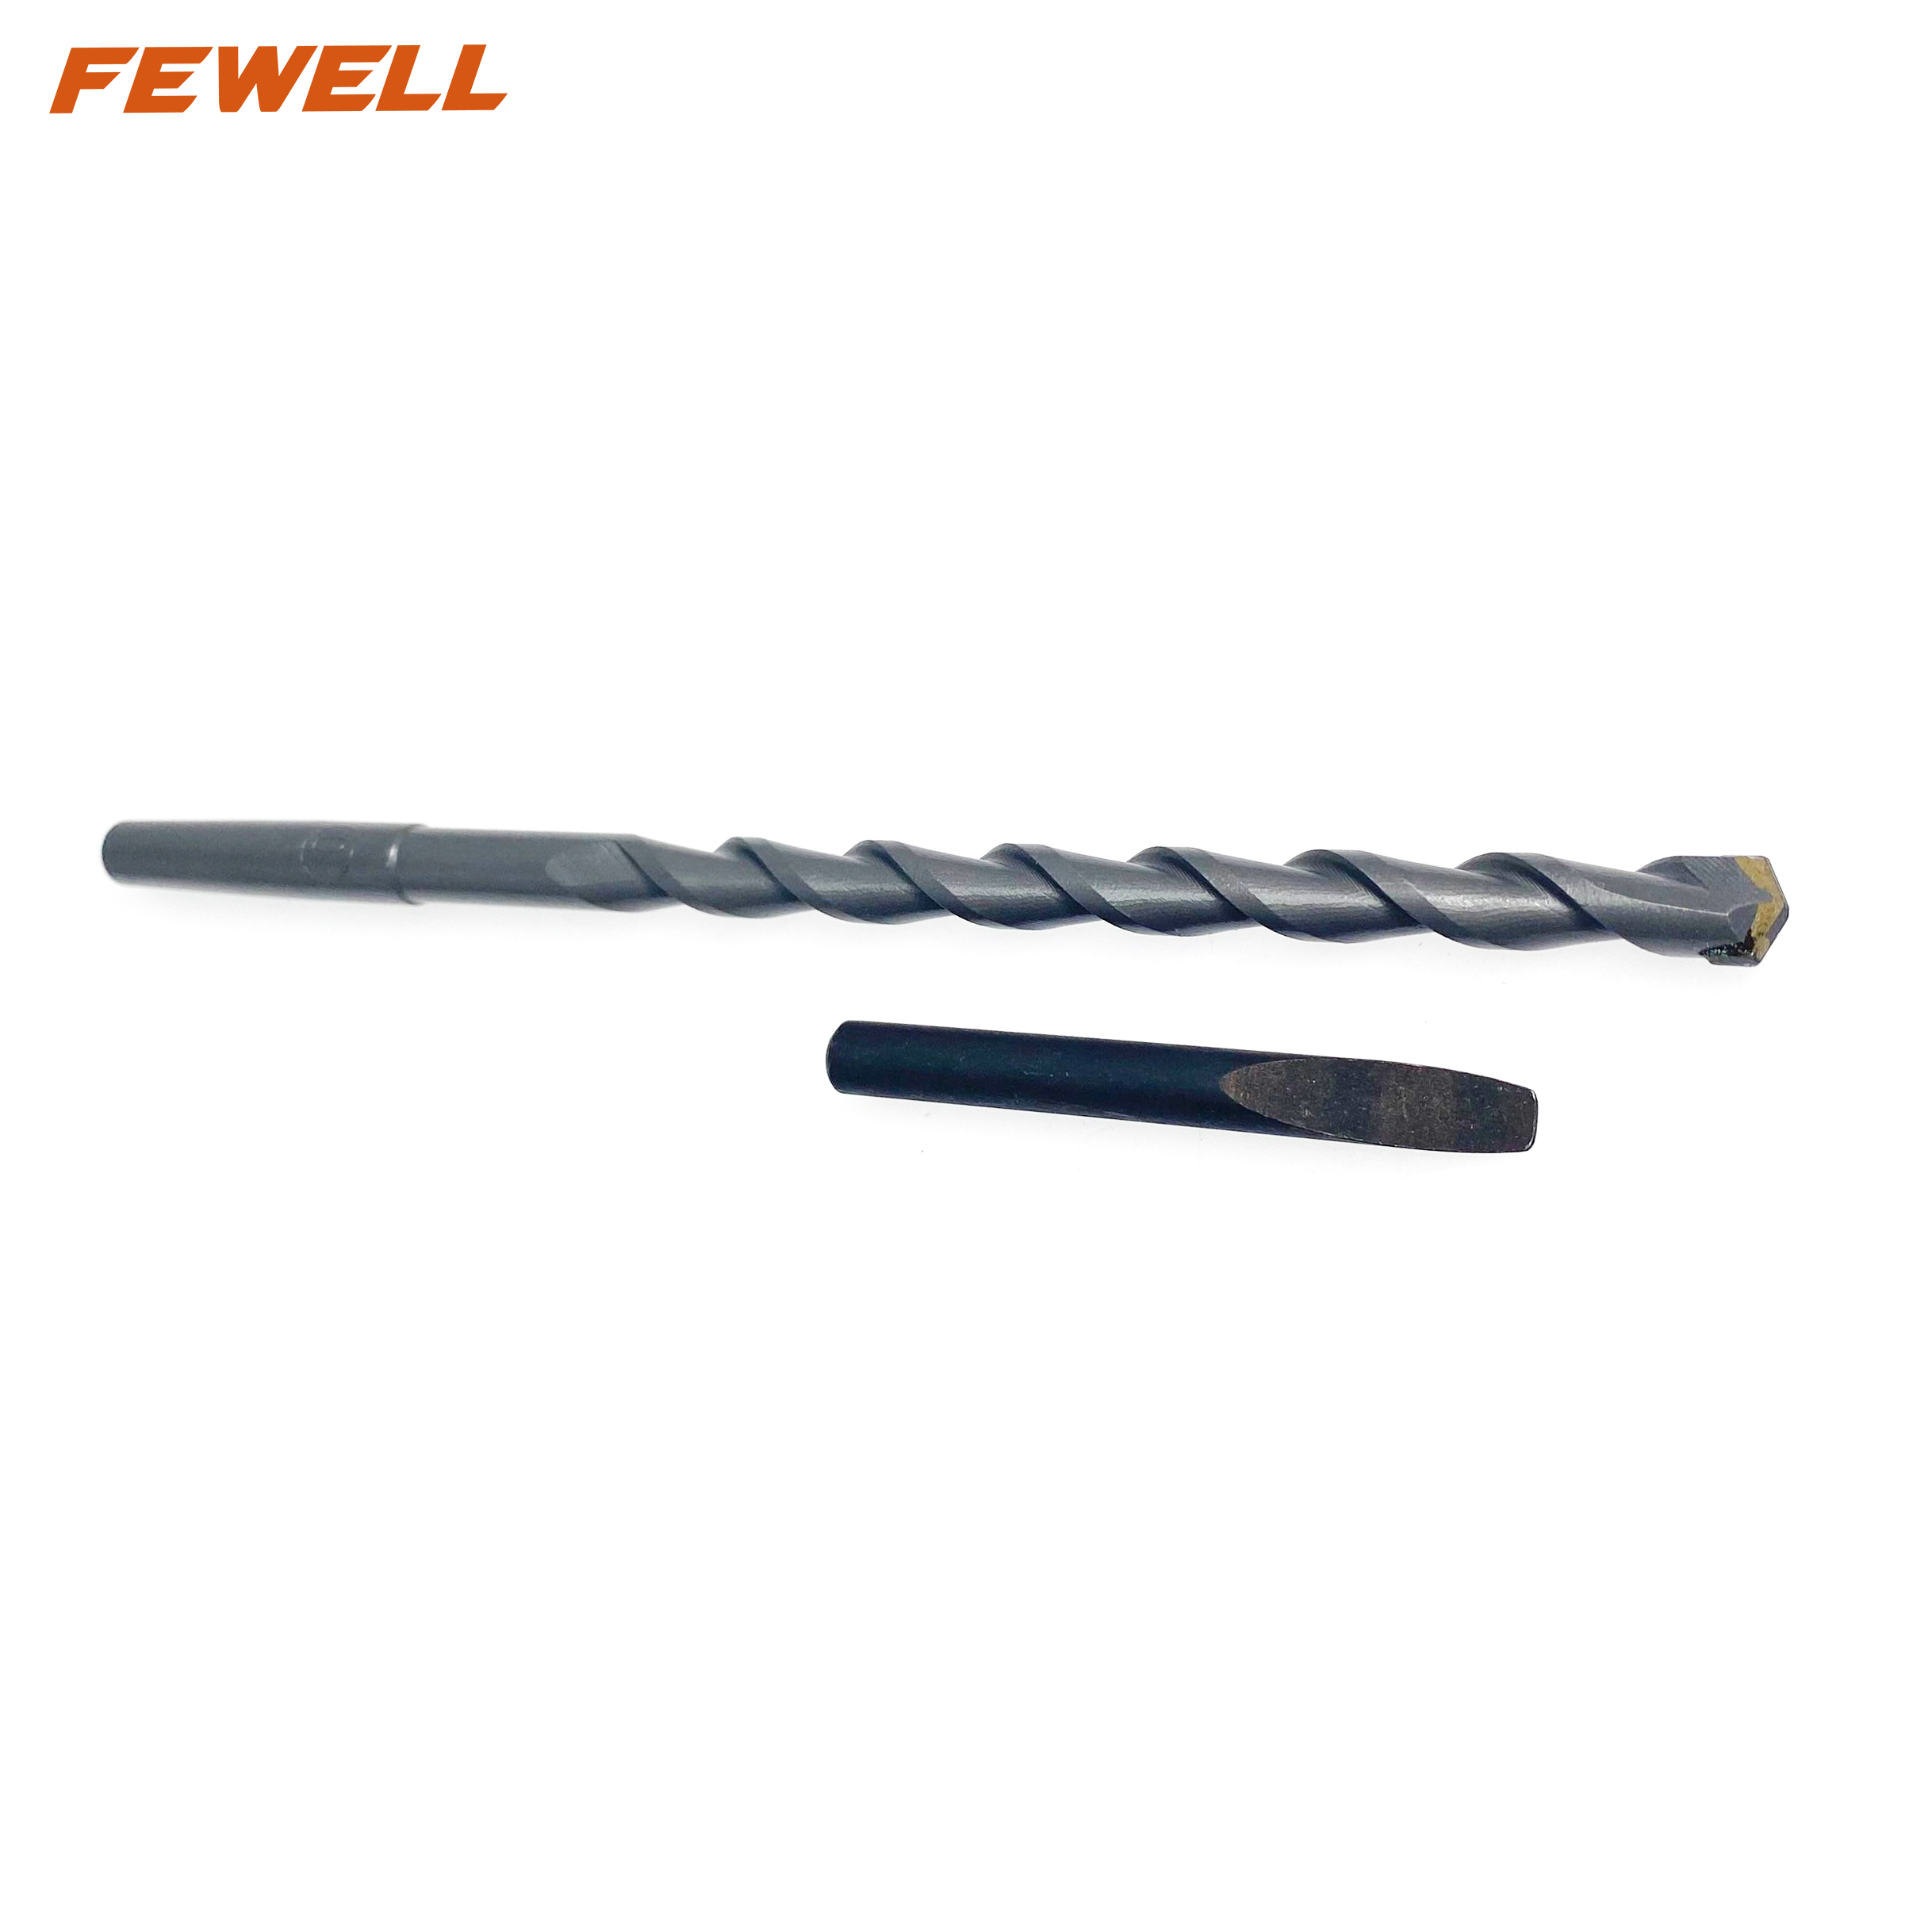 High quality 10x200mm Carbide Tipped Single Flute Round Shank pilot drill bit for Brick Concrete Masonry Drilling